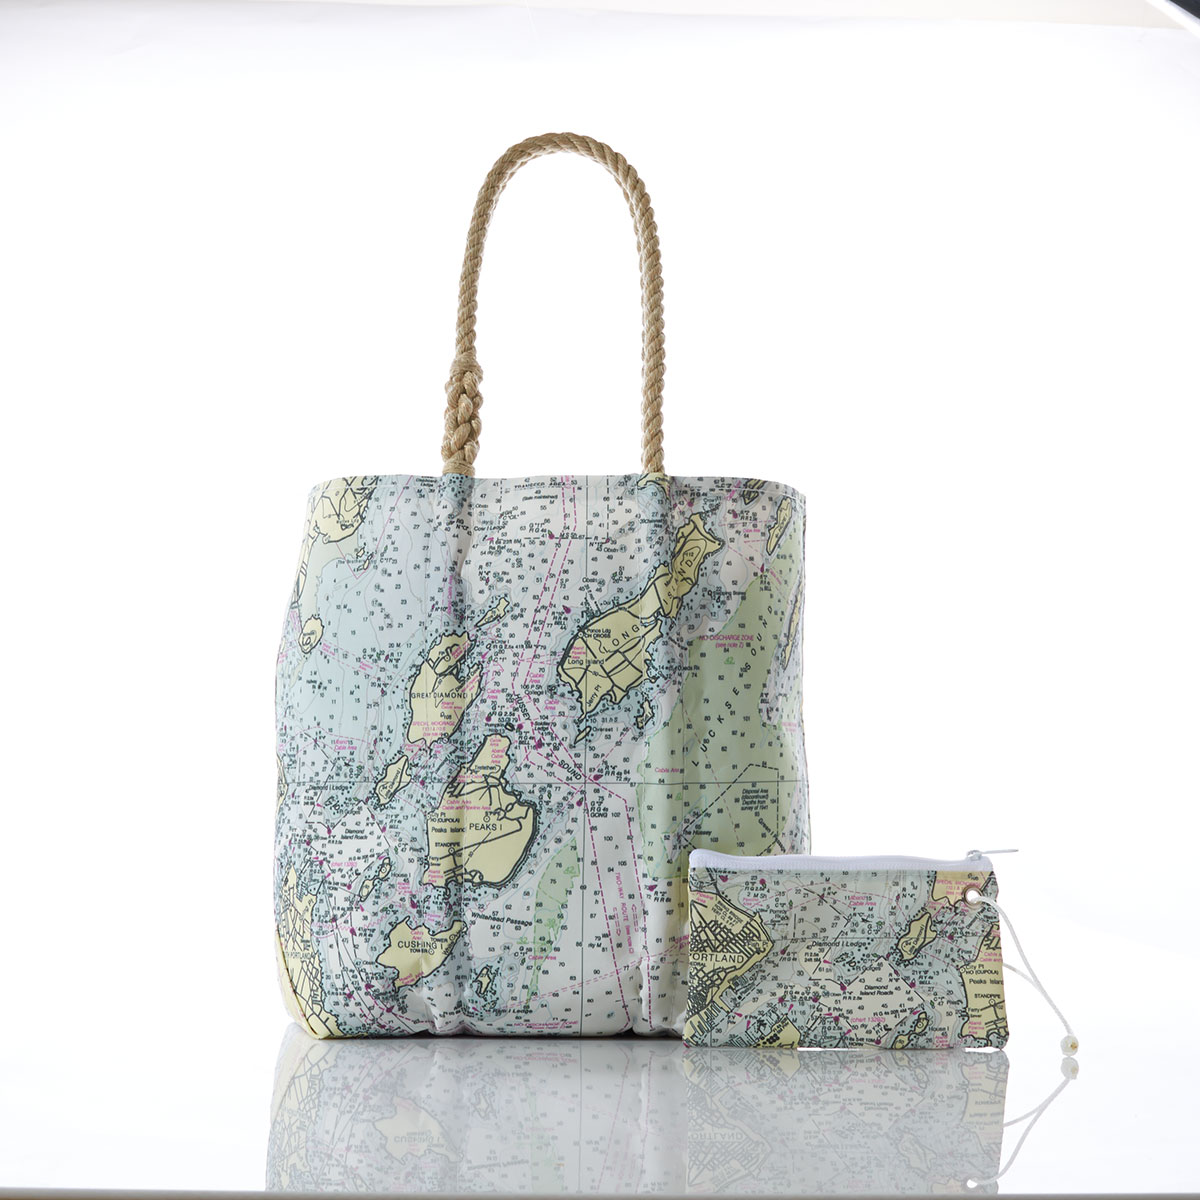 printed nautical chart of casco bay on recycled sail cloth tote with hemp rope handles, shown with matching wristlet